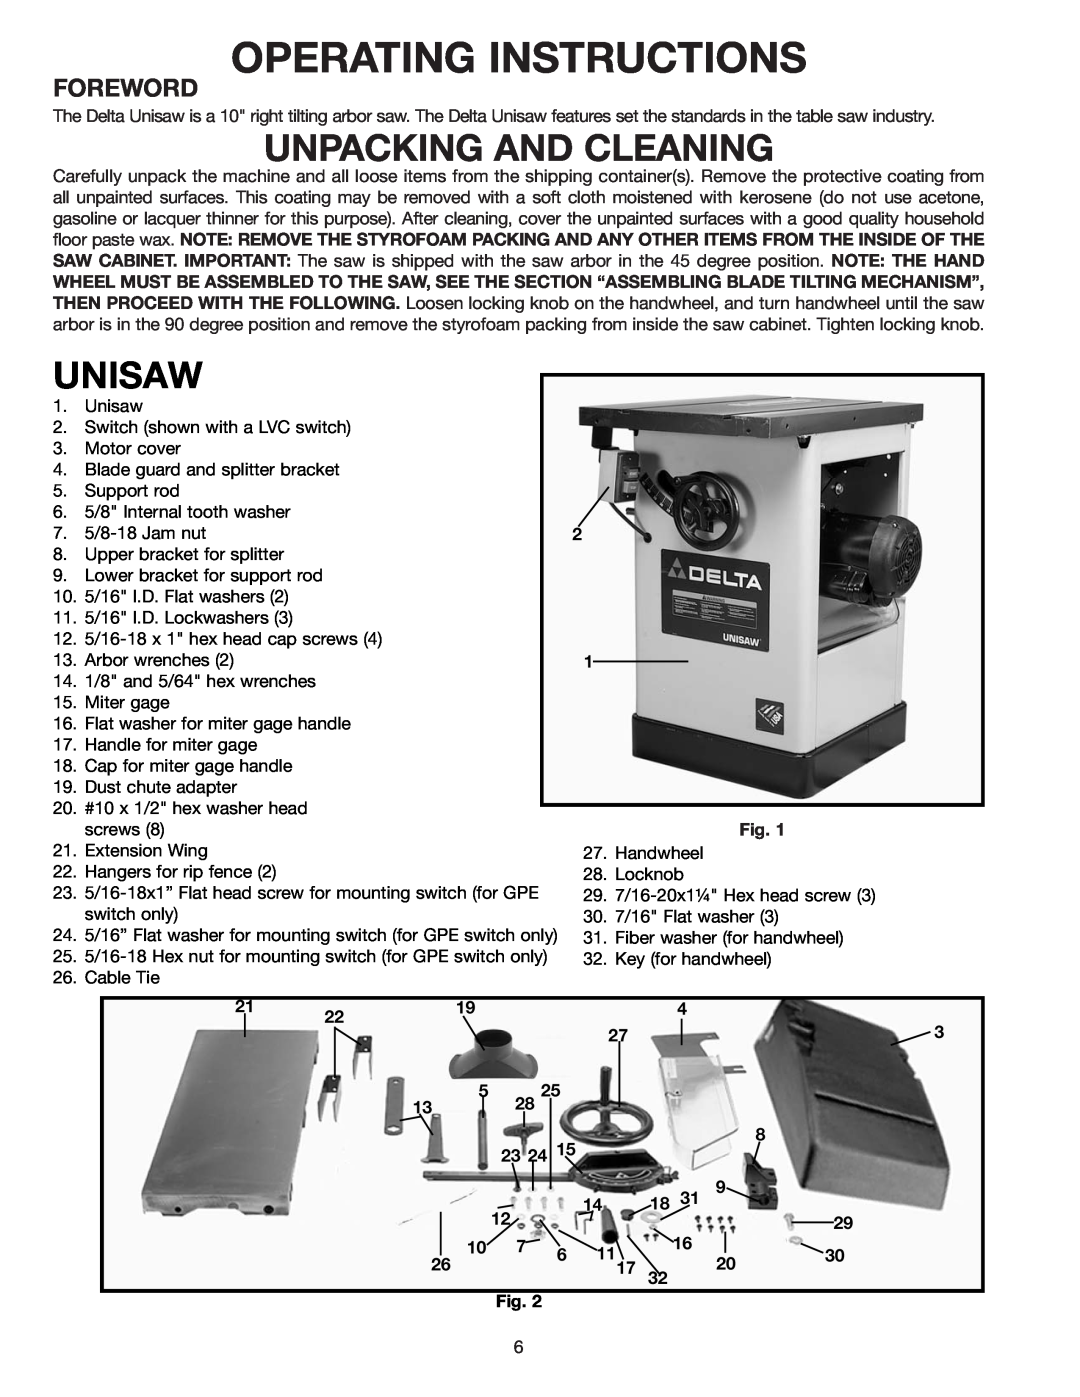 Delta 34-806 Unpacking And Cleaning, Unisaw, screws, Extension Wing, Handwheel, Hangers for rip fence, Locknob, Cable Tie 